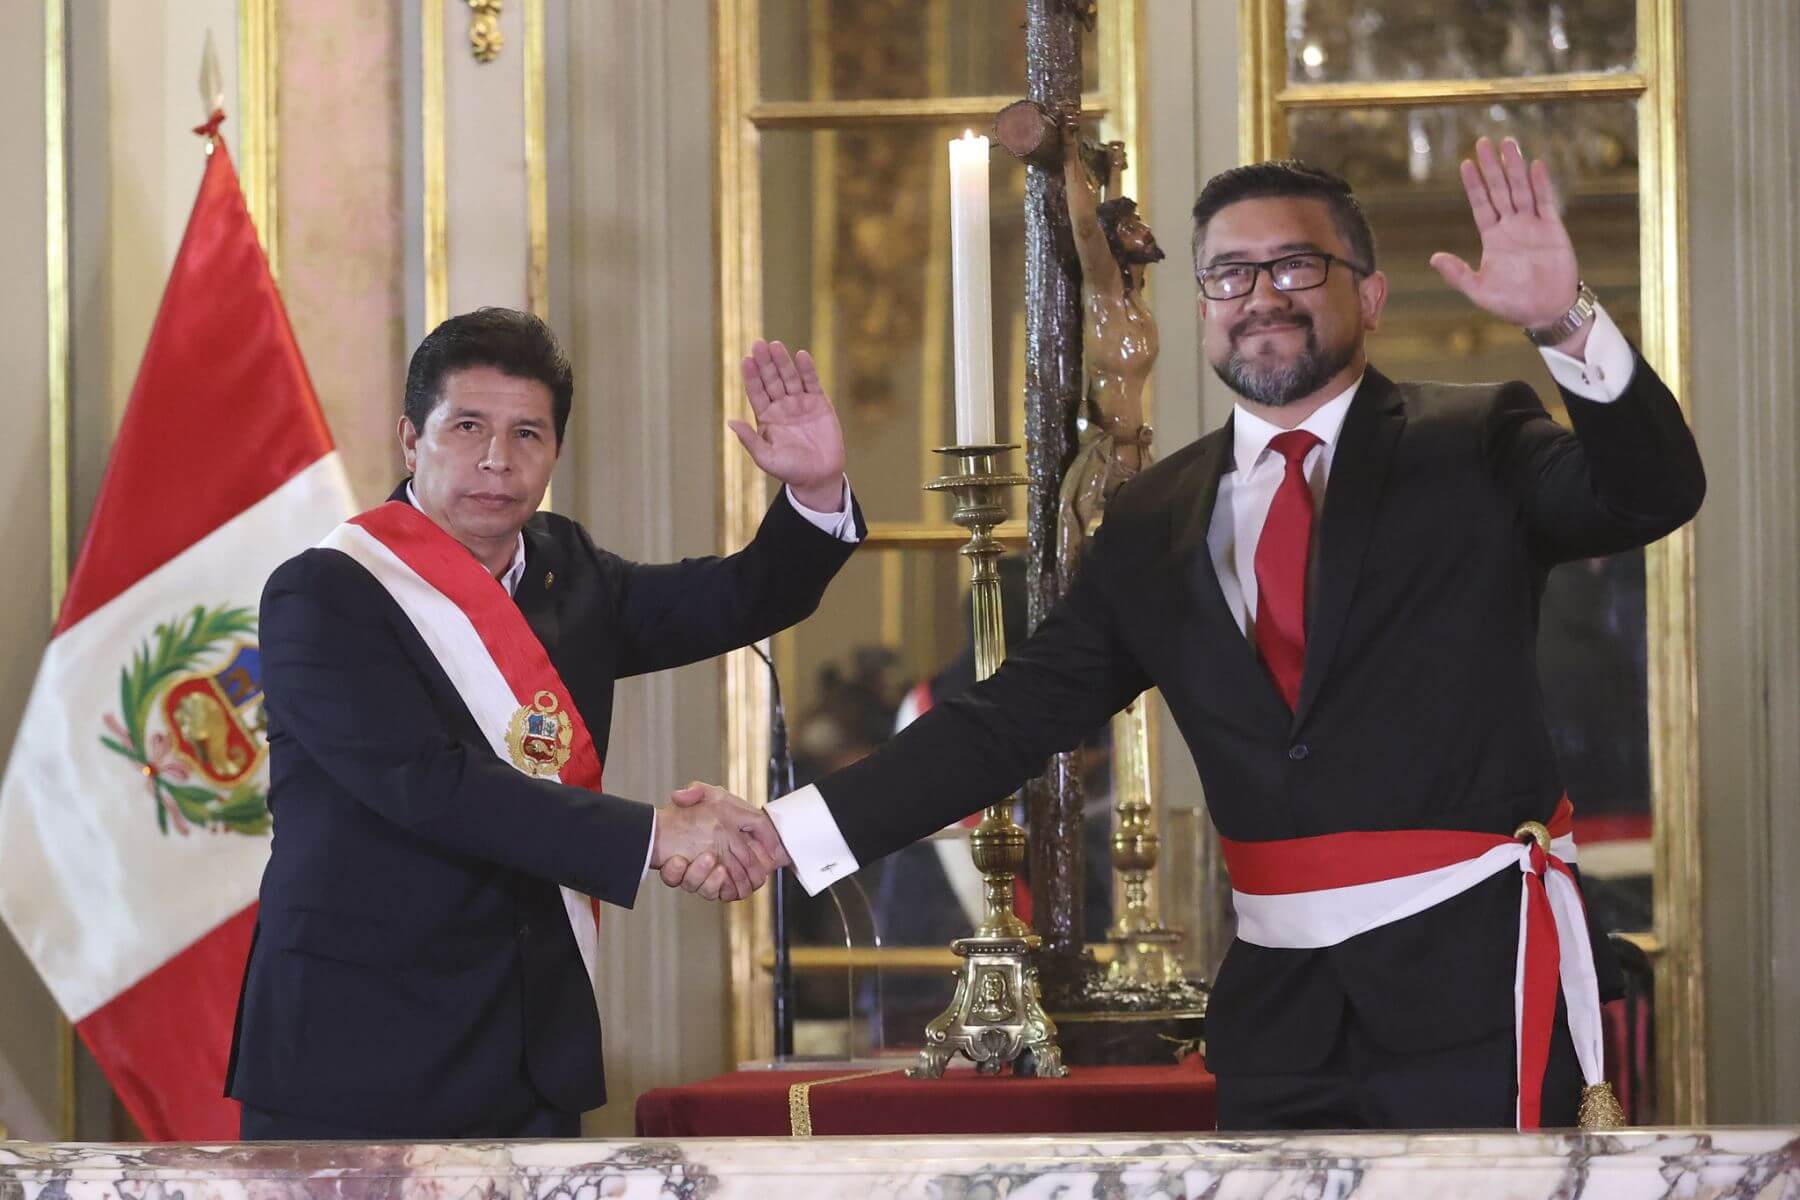 Peruvian Minister of Transport impeachment highlights President Castillo’s merry-go-round of government ministers